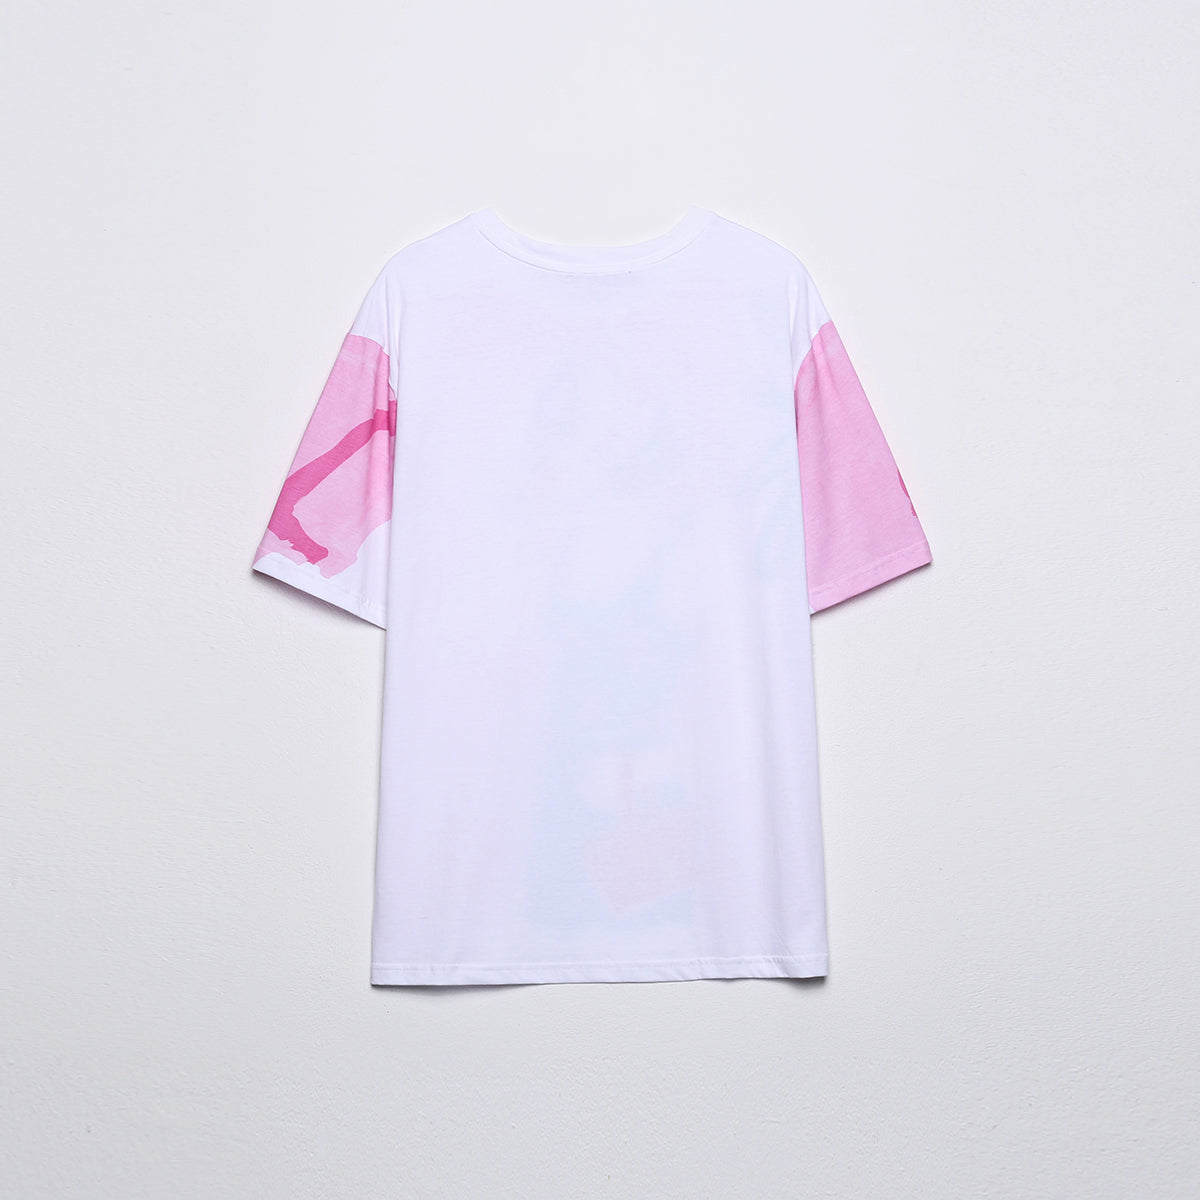 Contrast Color Girl Printed T-shirt for women